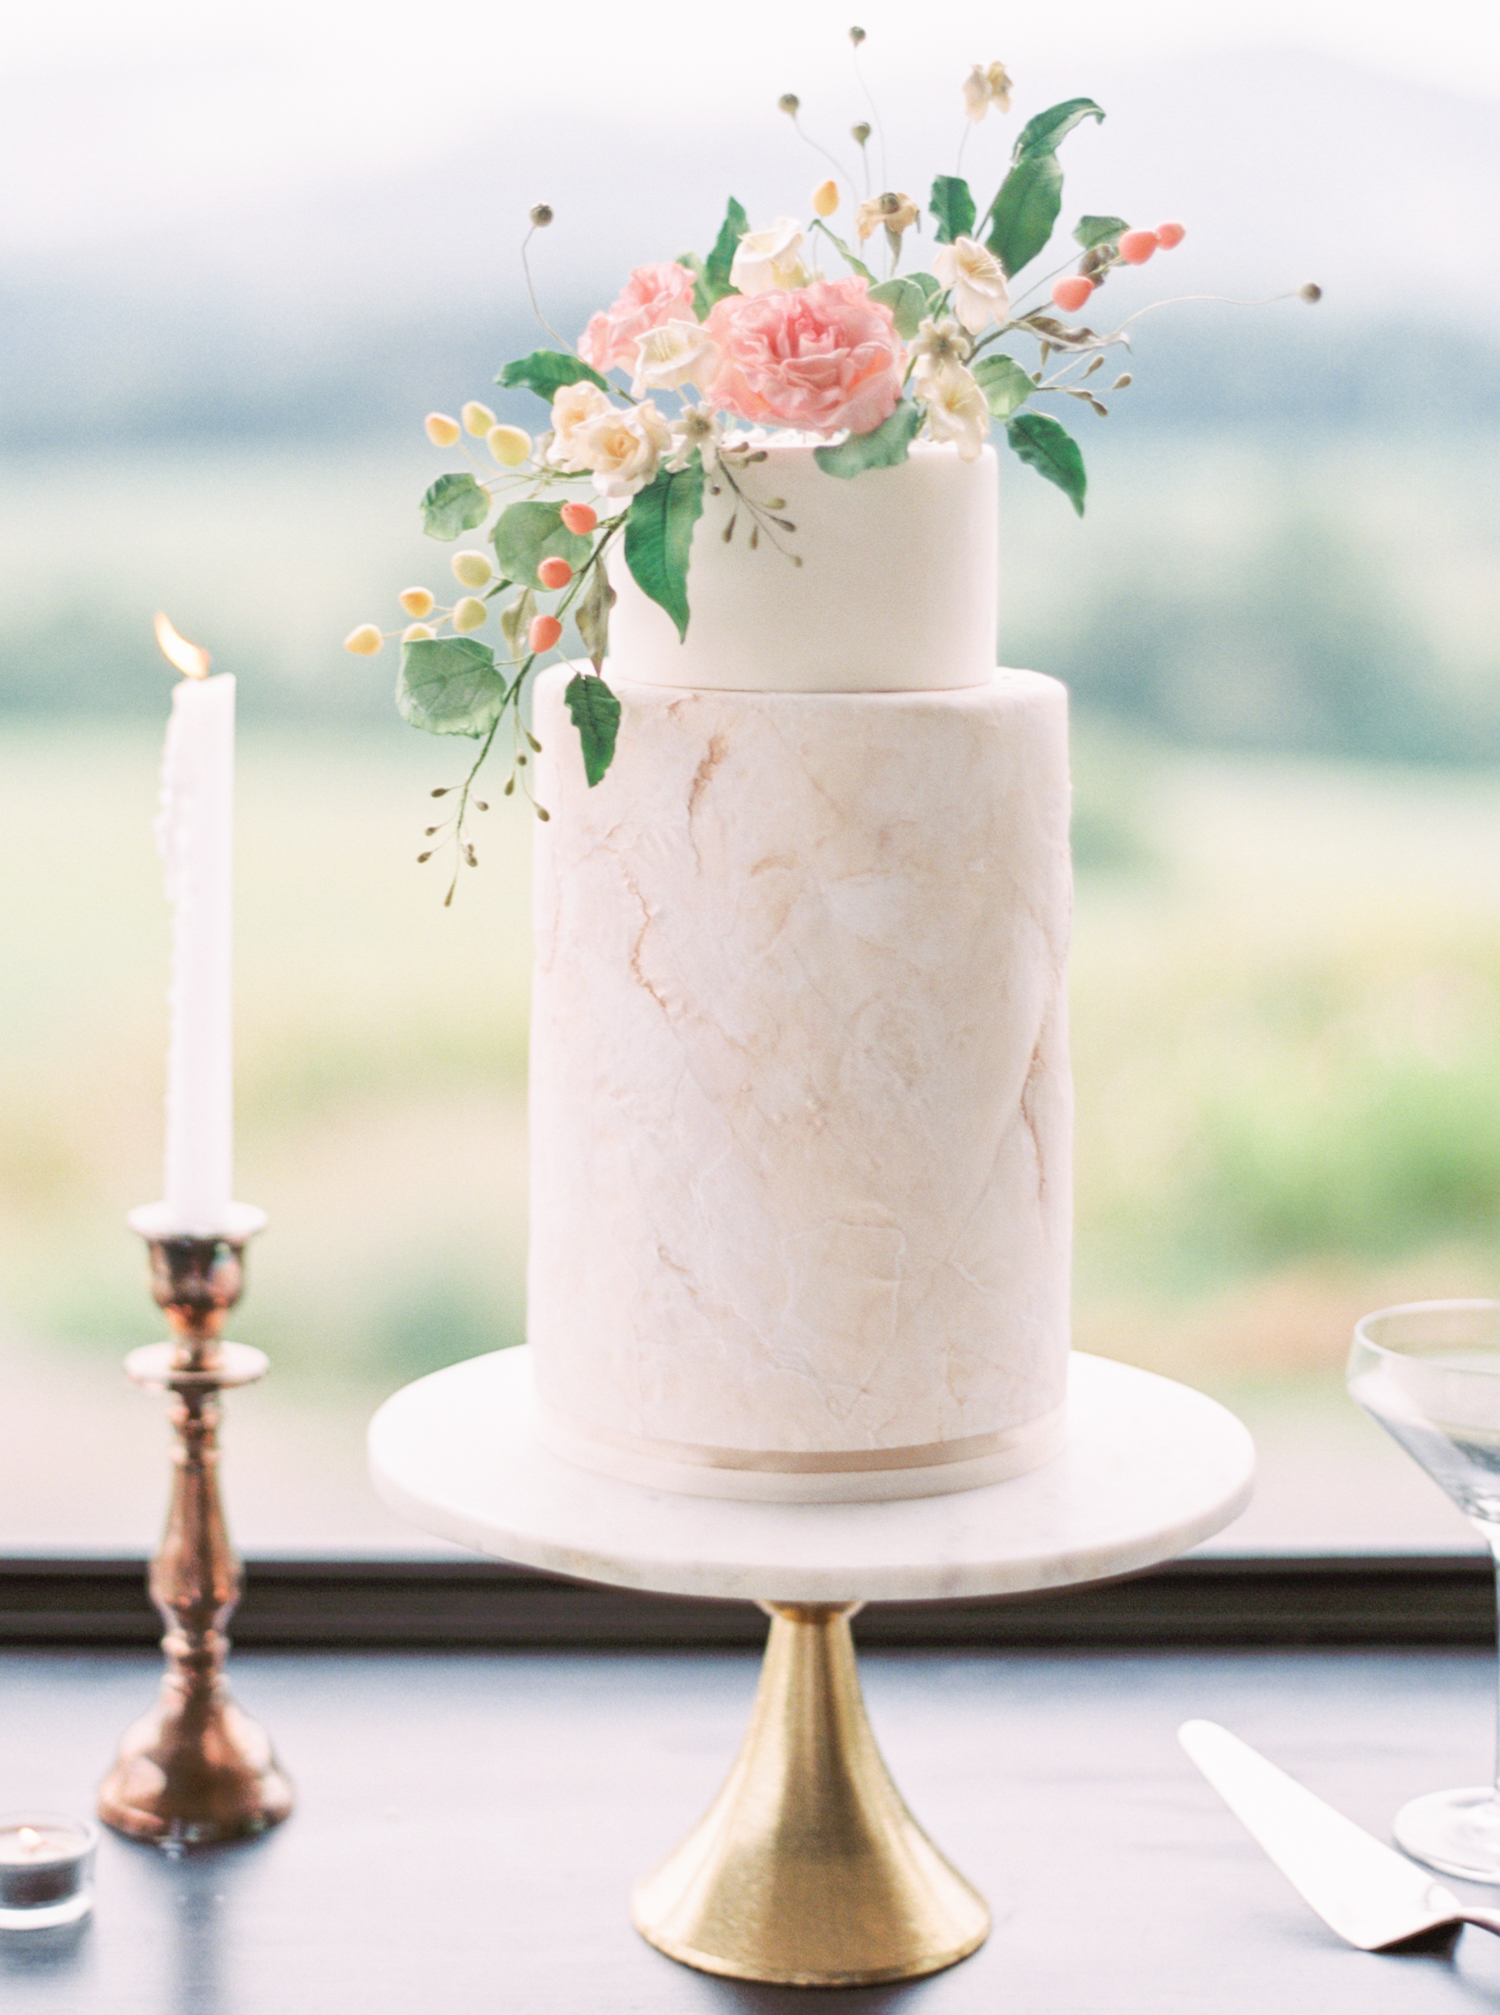 Pippin Hill Wedding Photos | Molly Carr Photography | Lauren Emerson Events | Pippin Hill Farm & Vineyard | Wedding Cake | Simple Wedding Cake | Marble Wedding Cake | Simple Wedding Decor | 